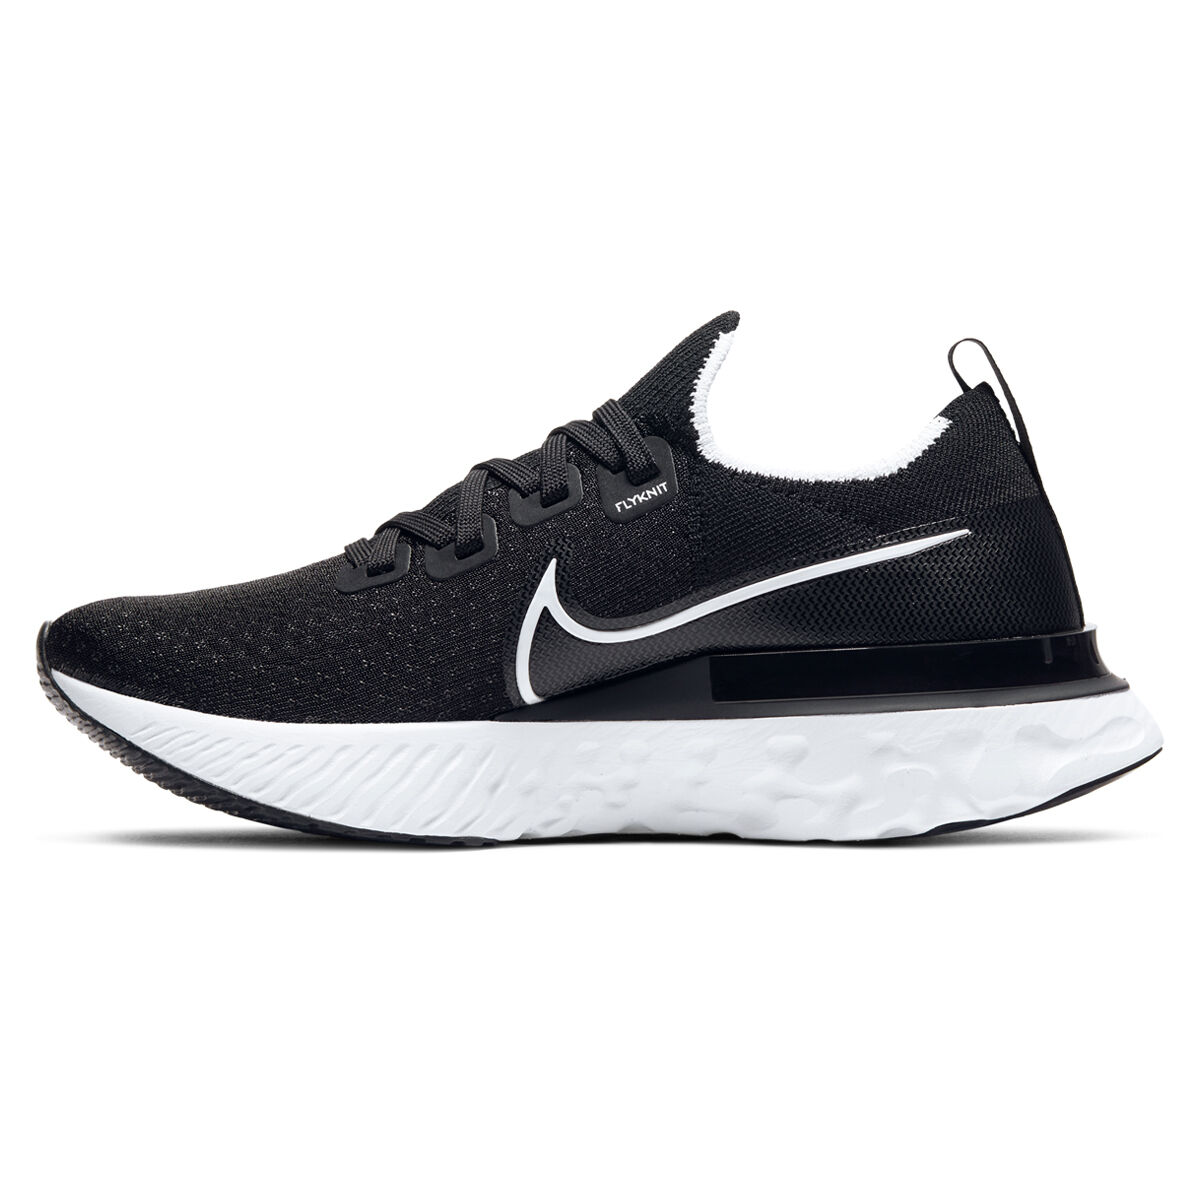 flyknit womens running shoes